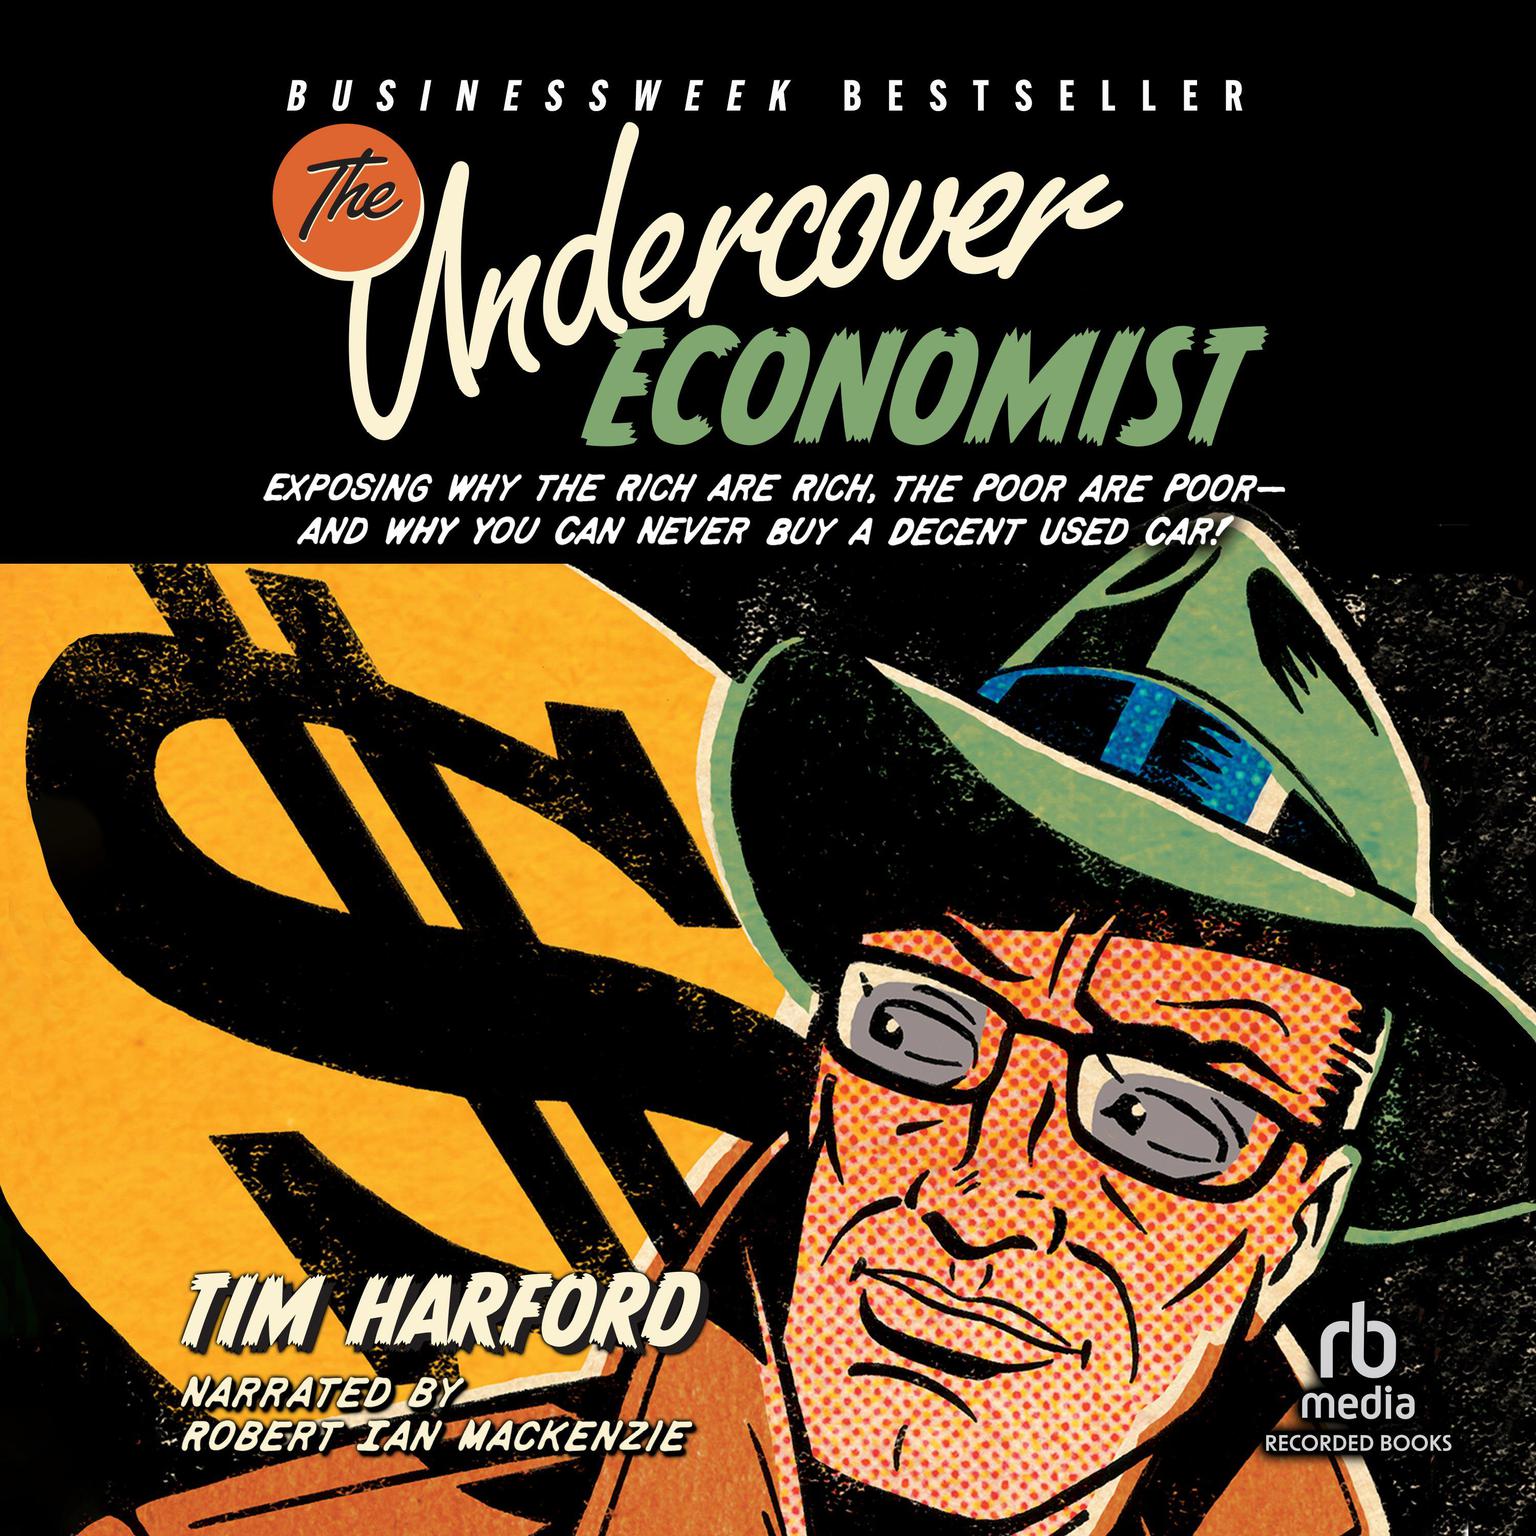 The Undercover Economist: Exposing Why the Rich Are Rich, the Poor Are Poor--and Why You Can Never Buy a Decent Used Car! Audiobook, by Tim Harford